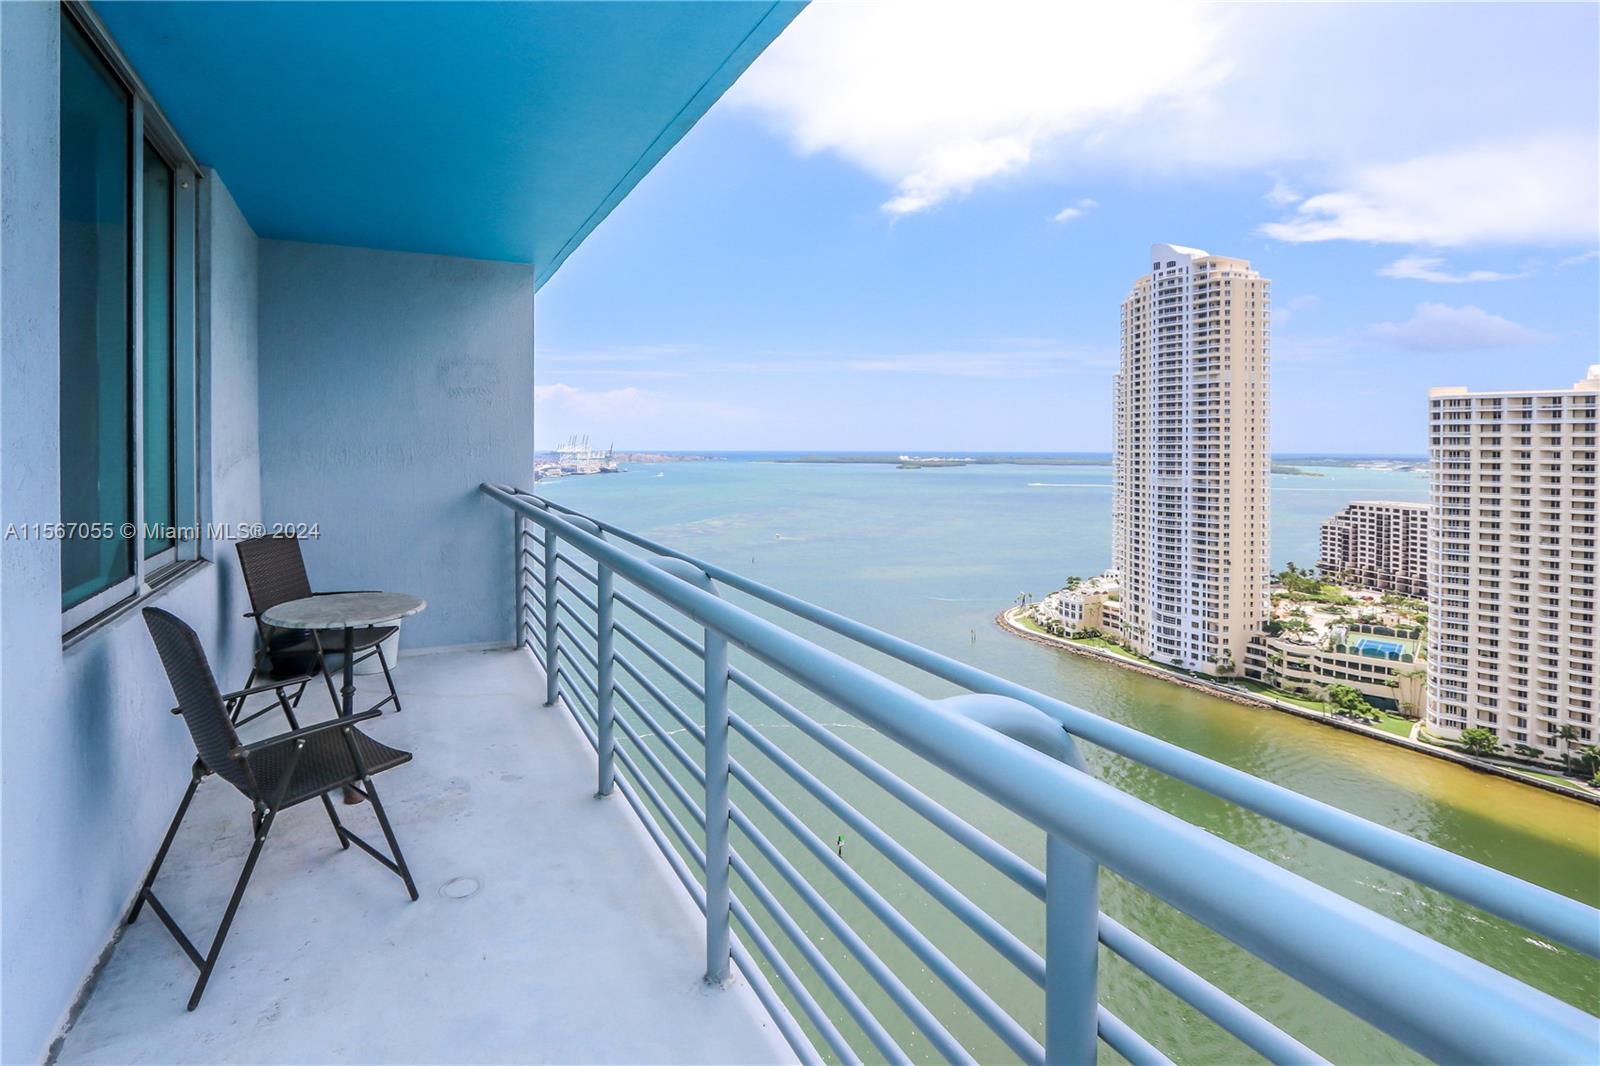 Beautiful 1 bedroom 1 bath condo nicely furnished overlooking Biscayne Bay, Miami River, and Brickell Skyline. Unit
comes with italian kitchen cabinets, granite countertop and marble countertop bath. Building amenities includes: 2
swimming pools, jacuzzi, 2 party rooms, SunDeck, 2 gyms, conference room, convenience store, and 24 hours
security, valet, and concierge. Sales office in building.